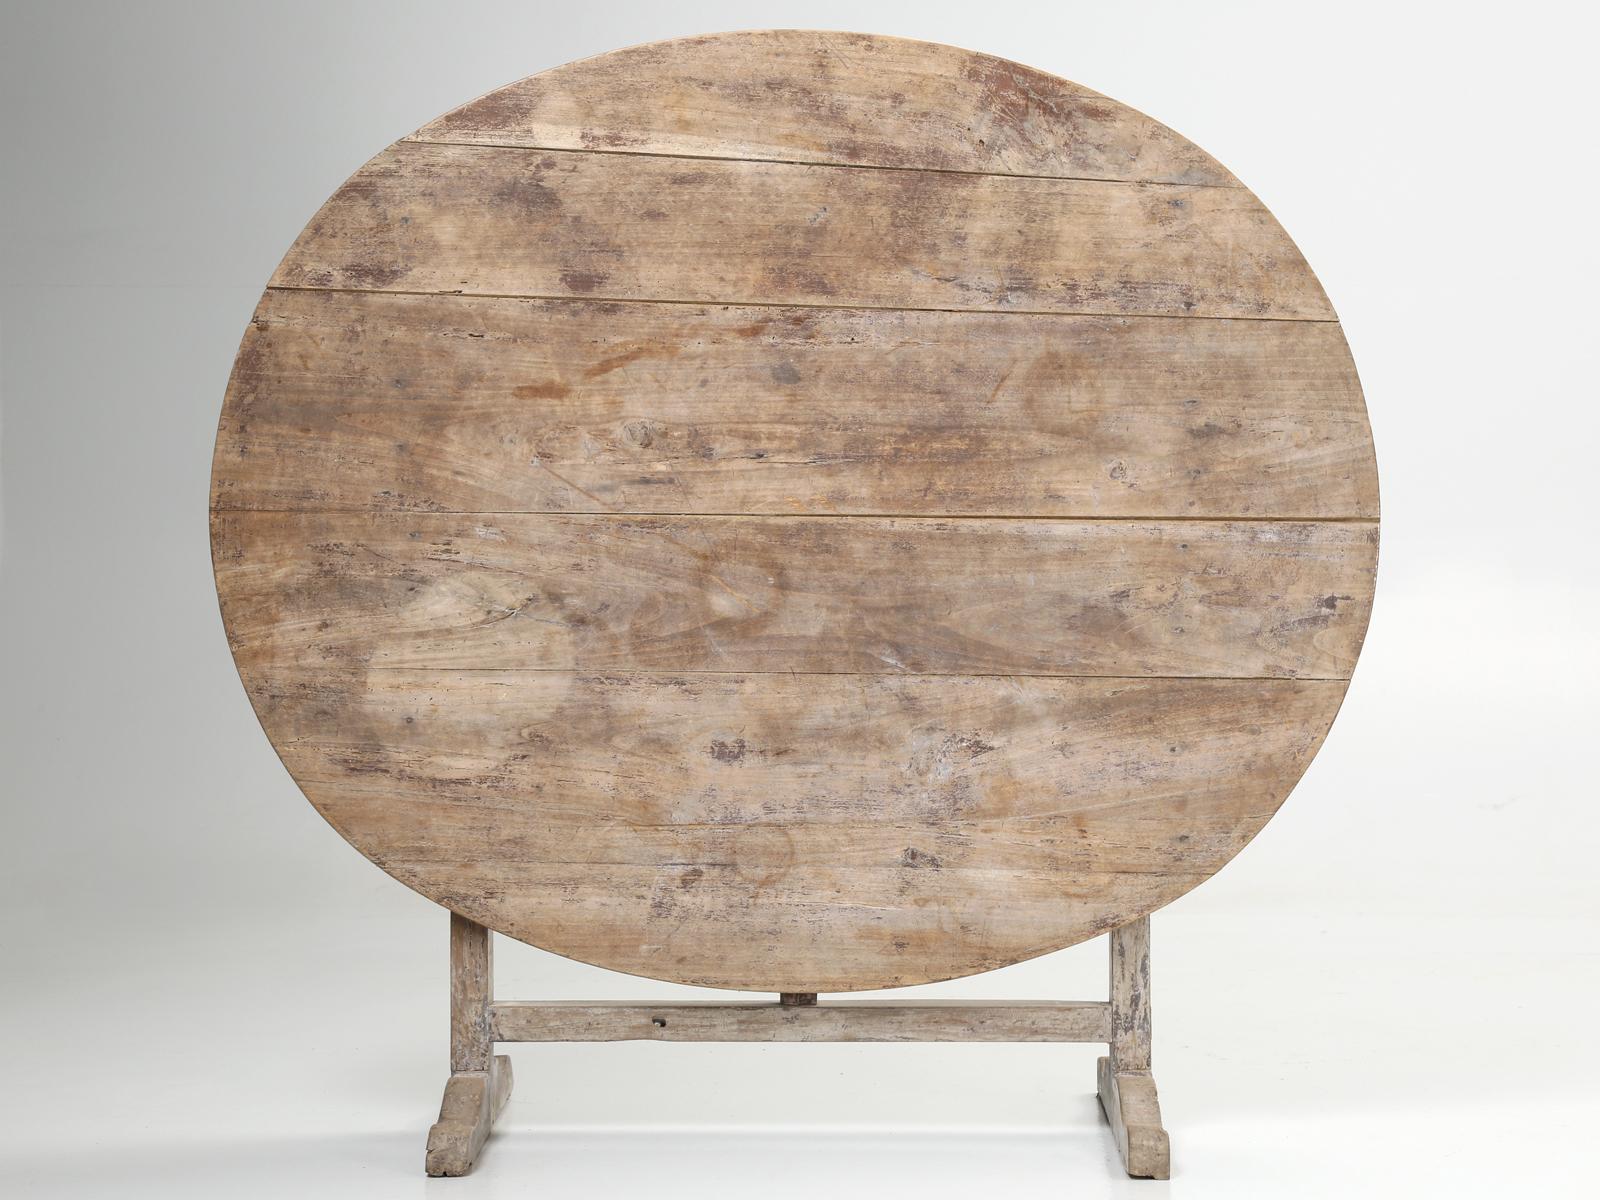 Antique French wine tasting table that was structurally rebuilt, but purposely left in its original well-worn patina.
When standing in its vertical position, the height is 49.63